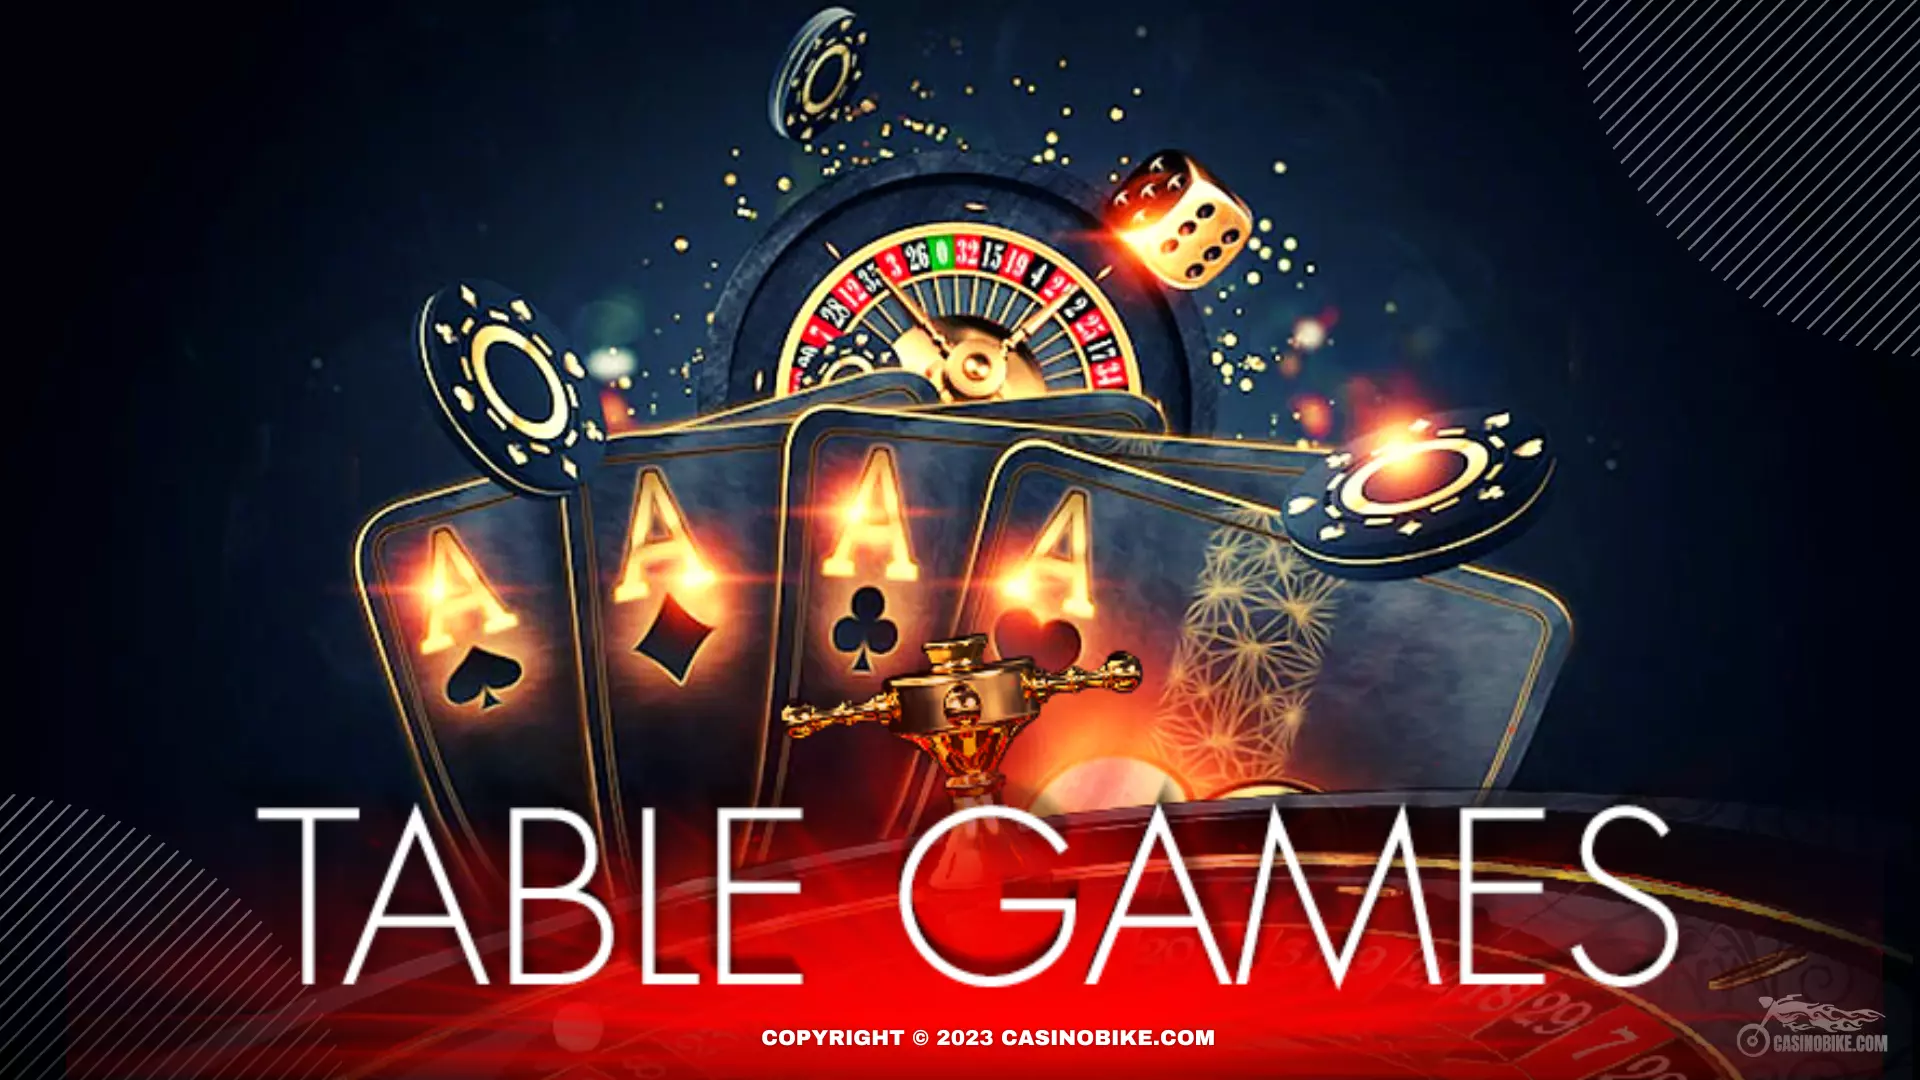 Where to play casino table games online